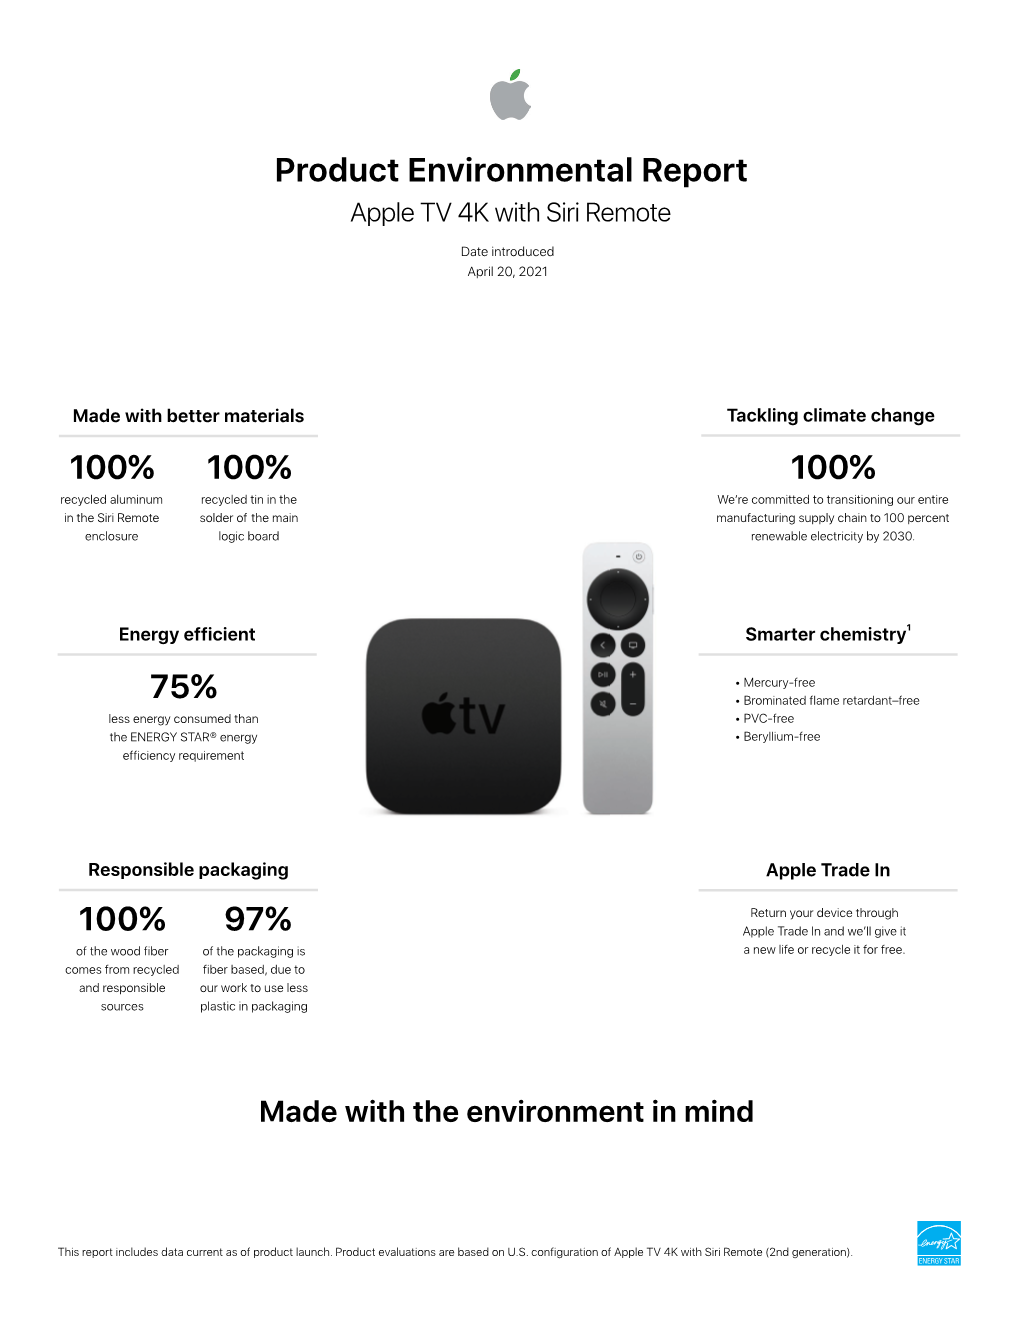 Apple TV 4K with Siri Remote Product Environmental Report Source Materials